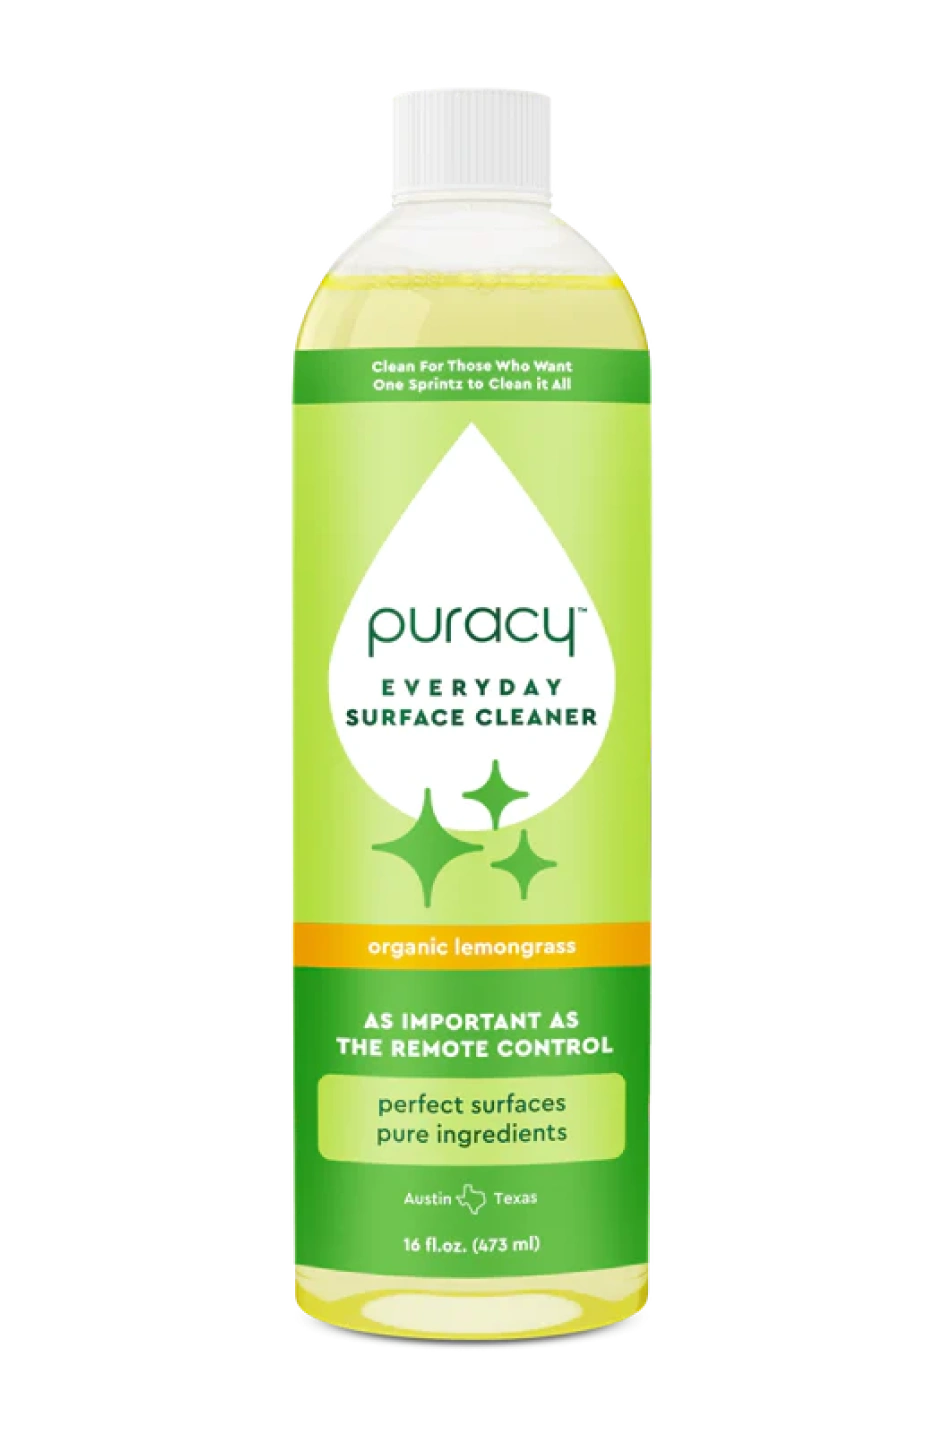 Puracy Multi-Surface Cleaner Concentrate, Makes 1 Gallon, Household Natural  All Purpose Cleaning Solution (Organic Lemongrass)